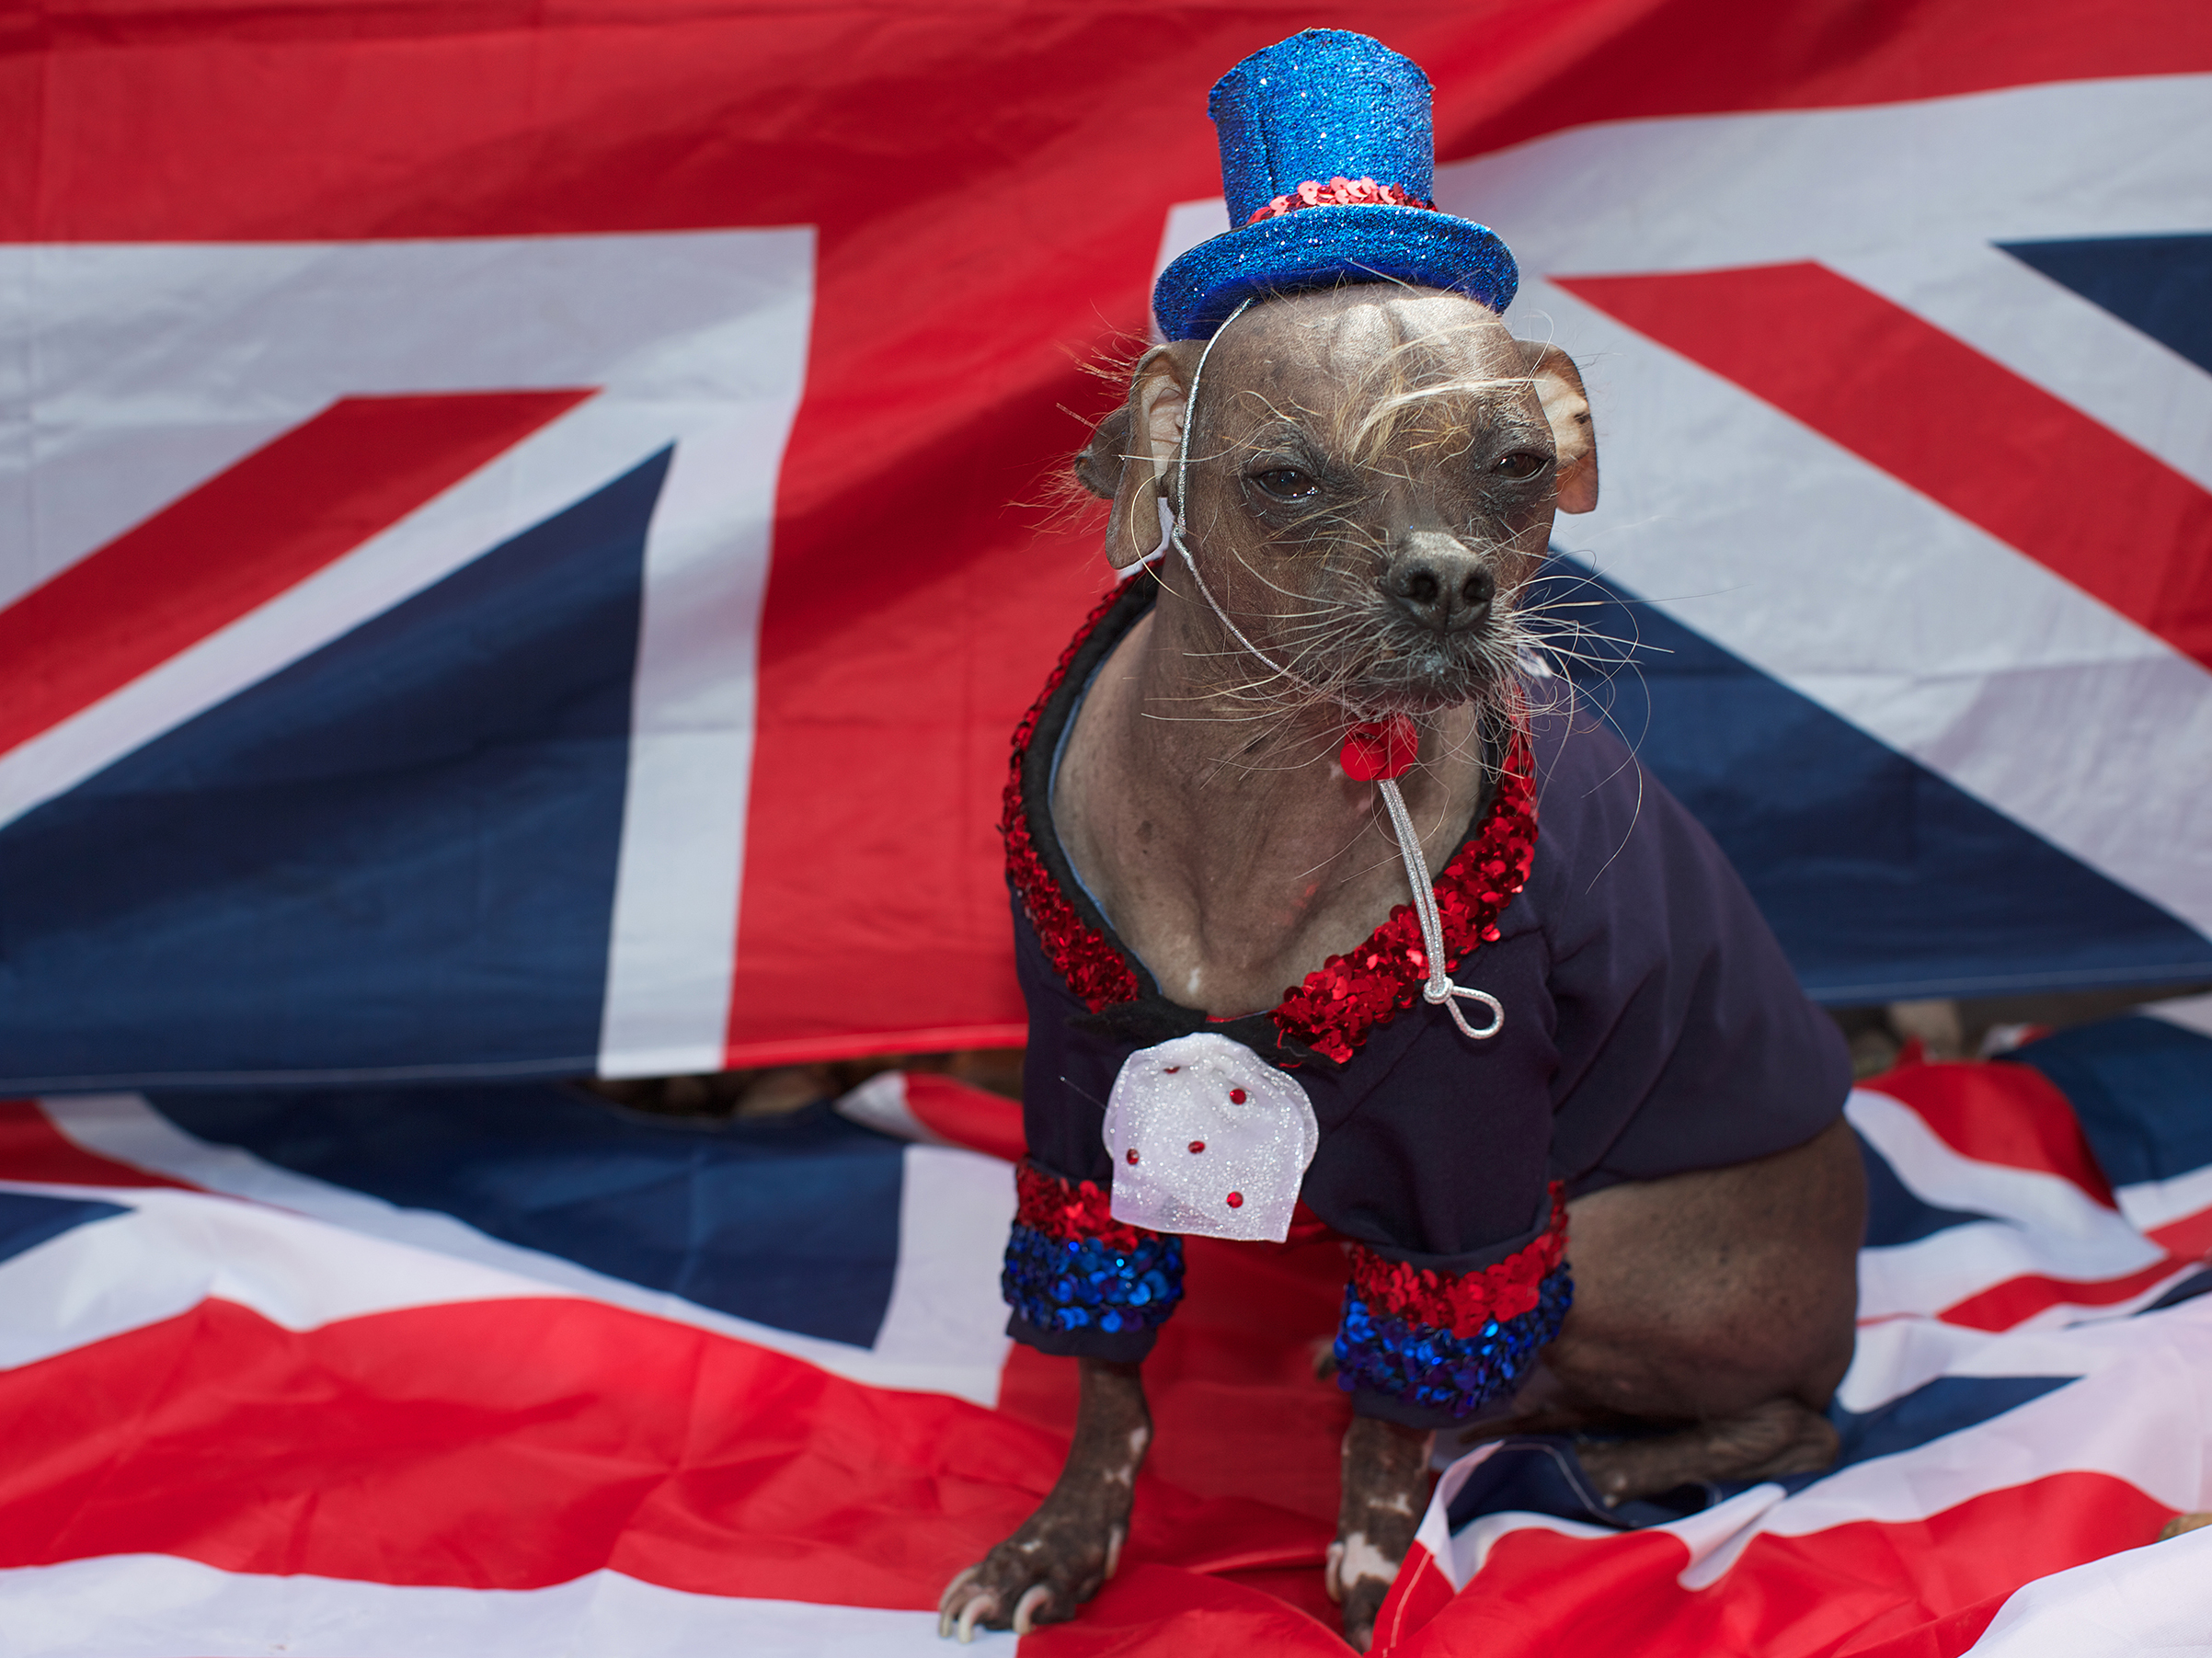 An eight year-old Chinese Crested dog called 'Mugly' is pictured during a photocall in London, on June 28, 2012. Mugly, a former rescue dog, was named the world's ugliest dog at the 'World's Ugliest Dog Competition' in Calif. on June 22, 2012.